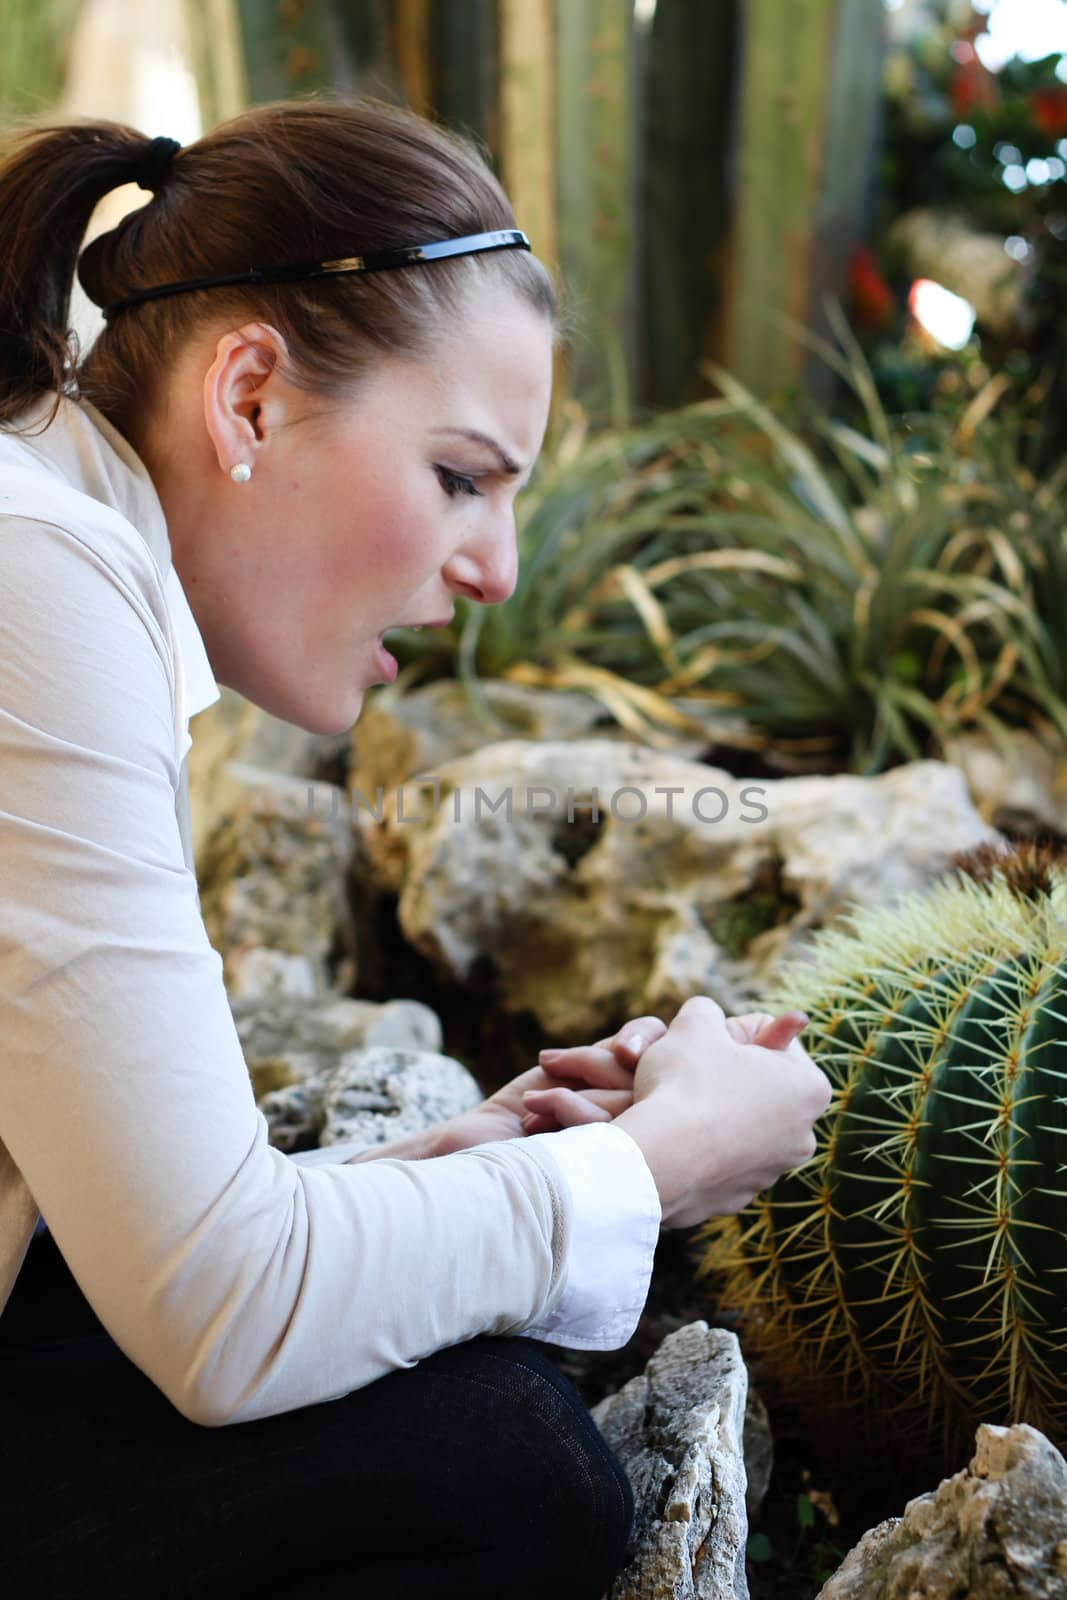 Woman hurt herself on a thorn from a cactus and is holding her hand